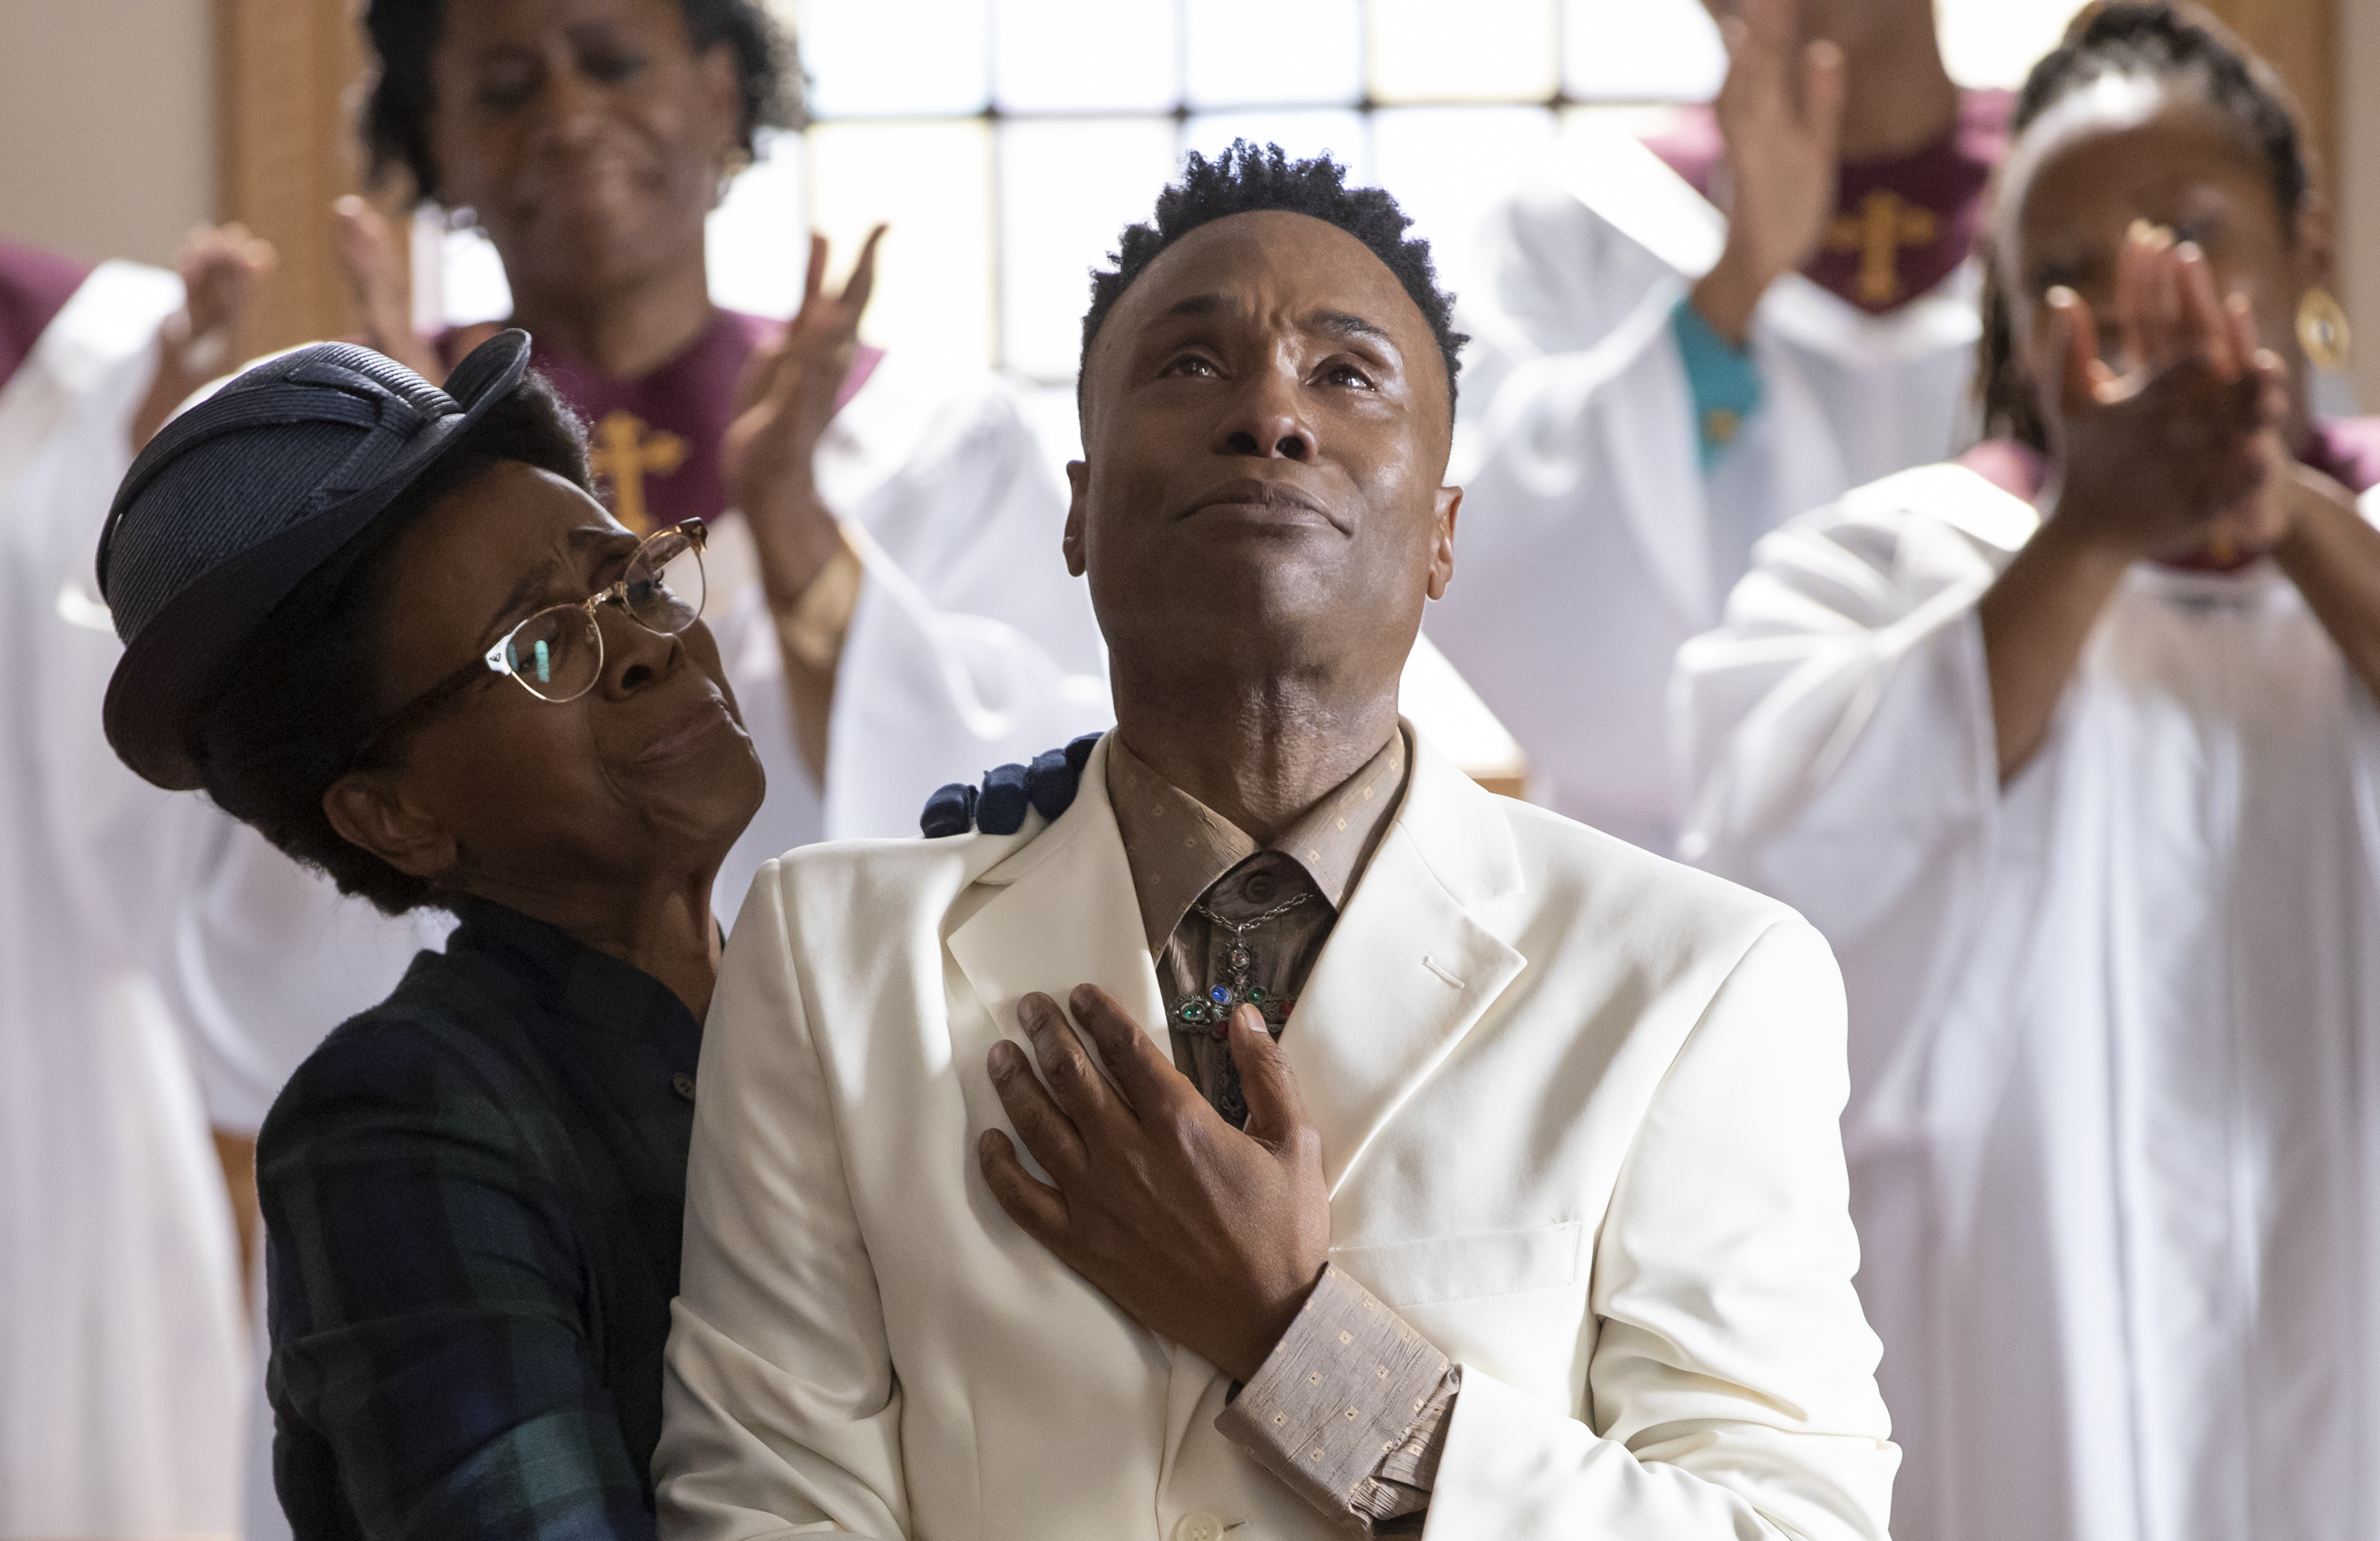 L-R: Janet Hubert as Latrice, Billy Porter as Pray Tell in 'Pose' (Eric Liebowitz/FX)